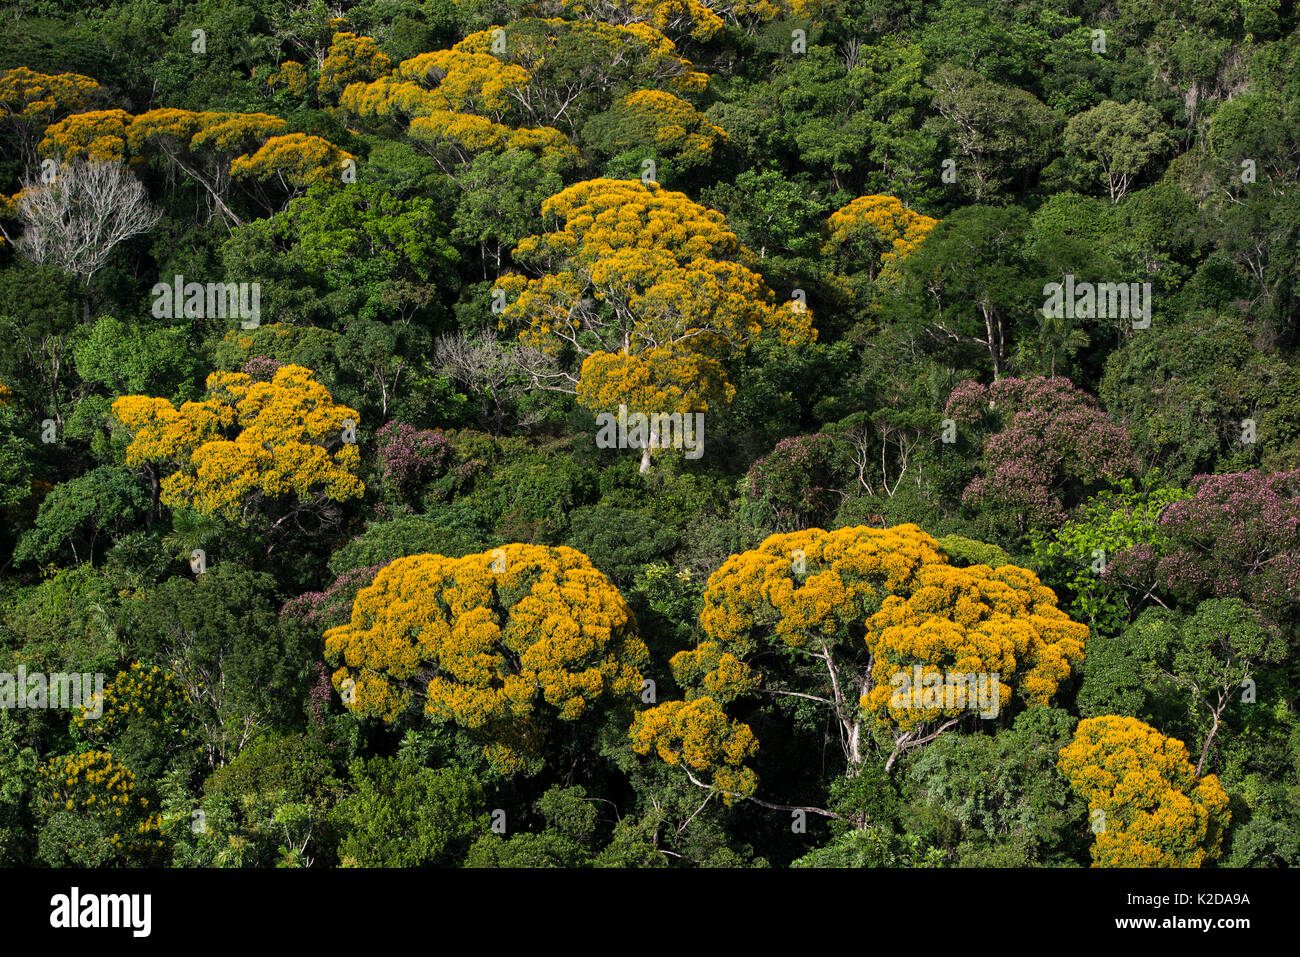 Tropical rainforest canopy with yellow flowering trees, Kupinang region, Guyana, South America Stock Photo